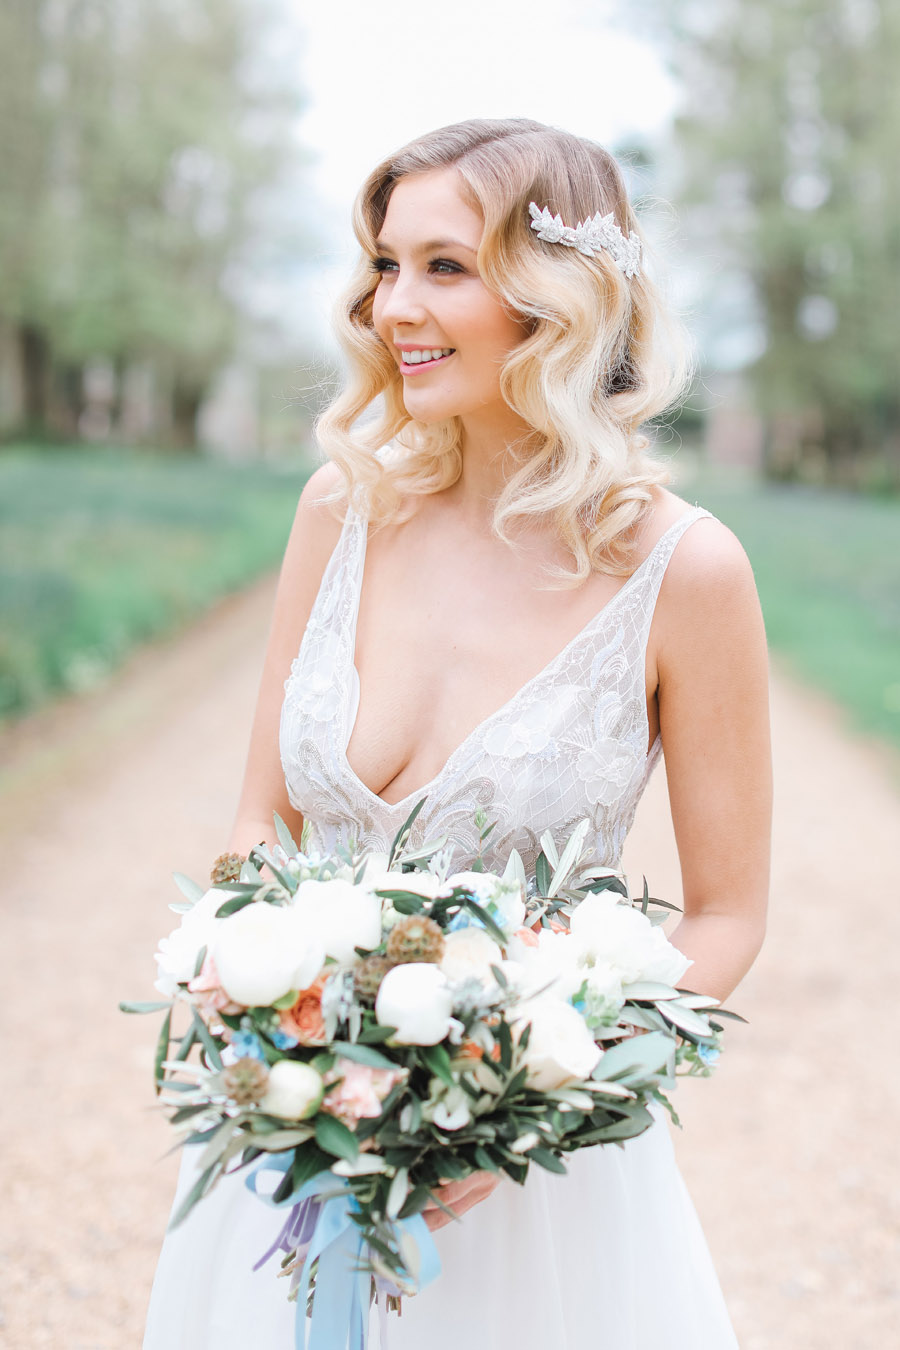 Romantic wedding ideas from Hale Park, photo by Charlotte Wise Photography (27)